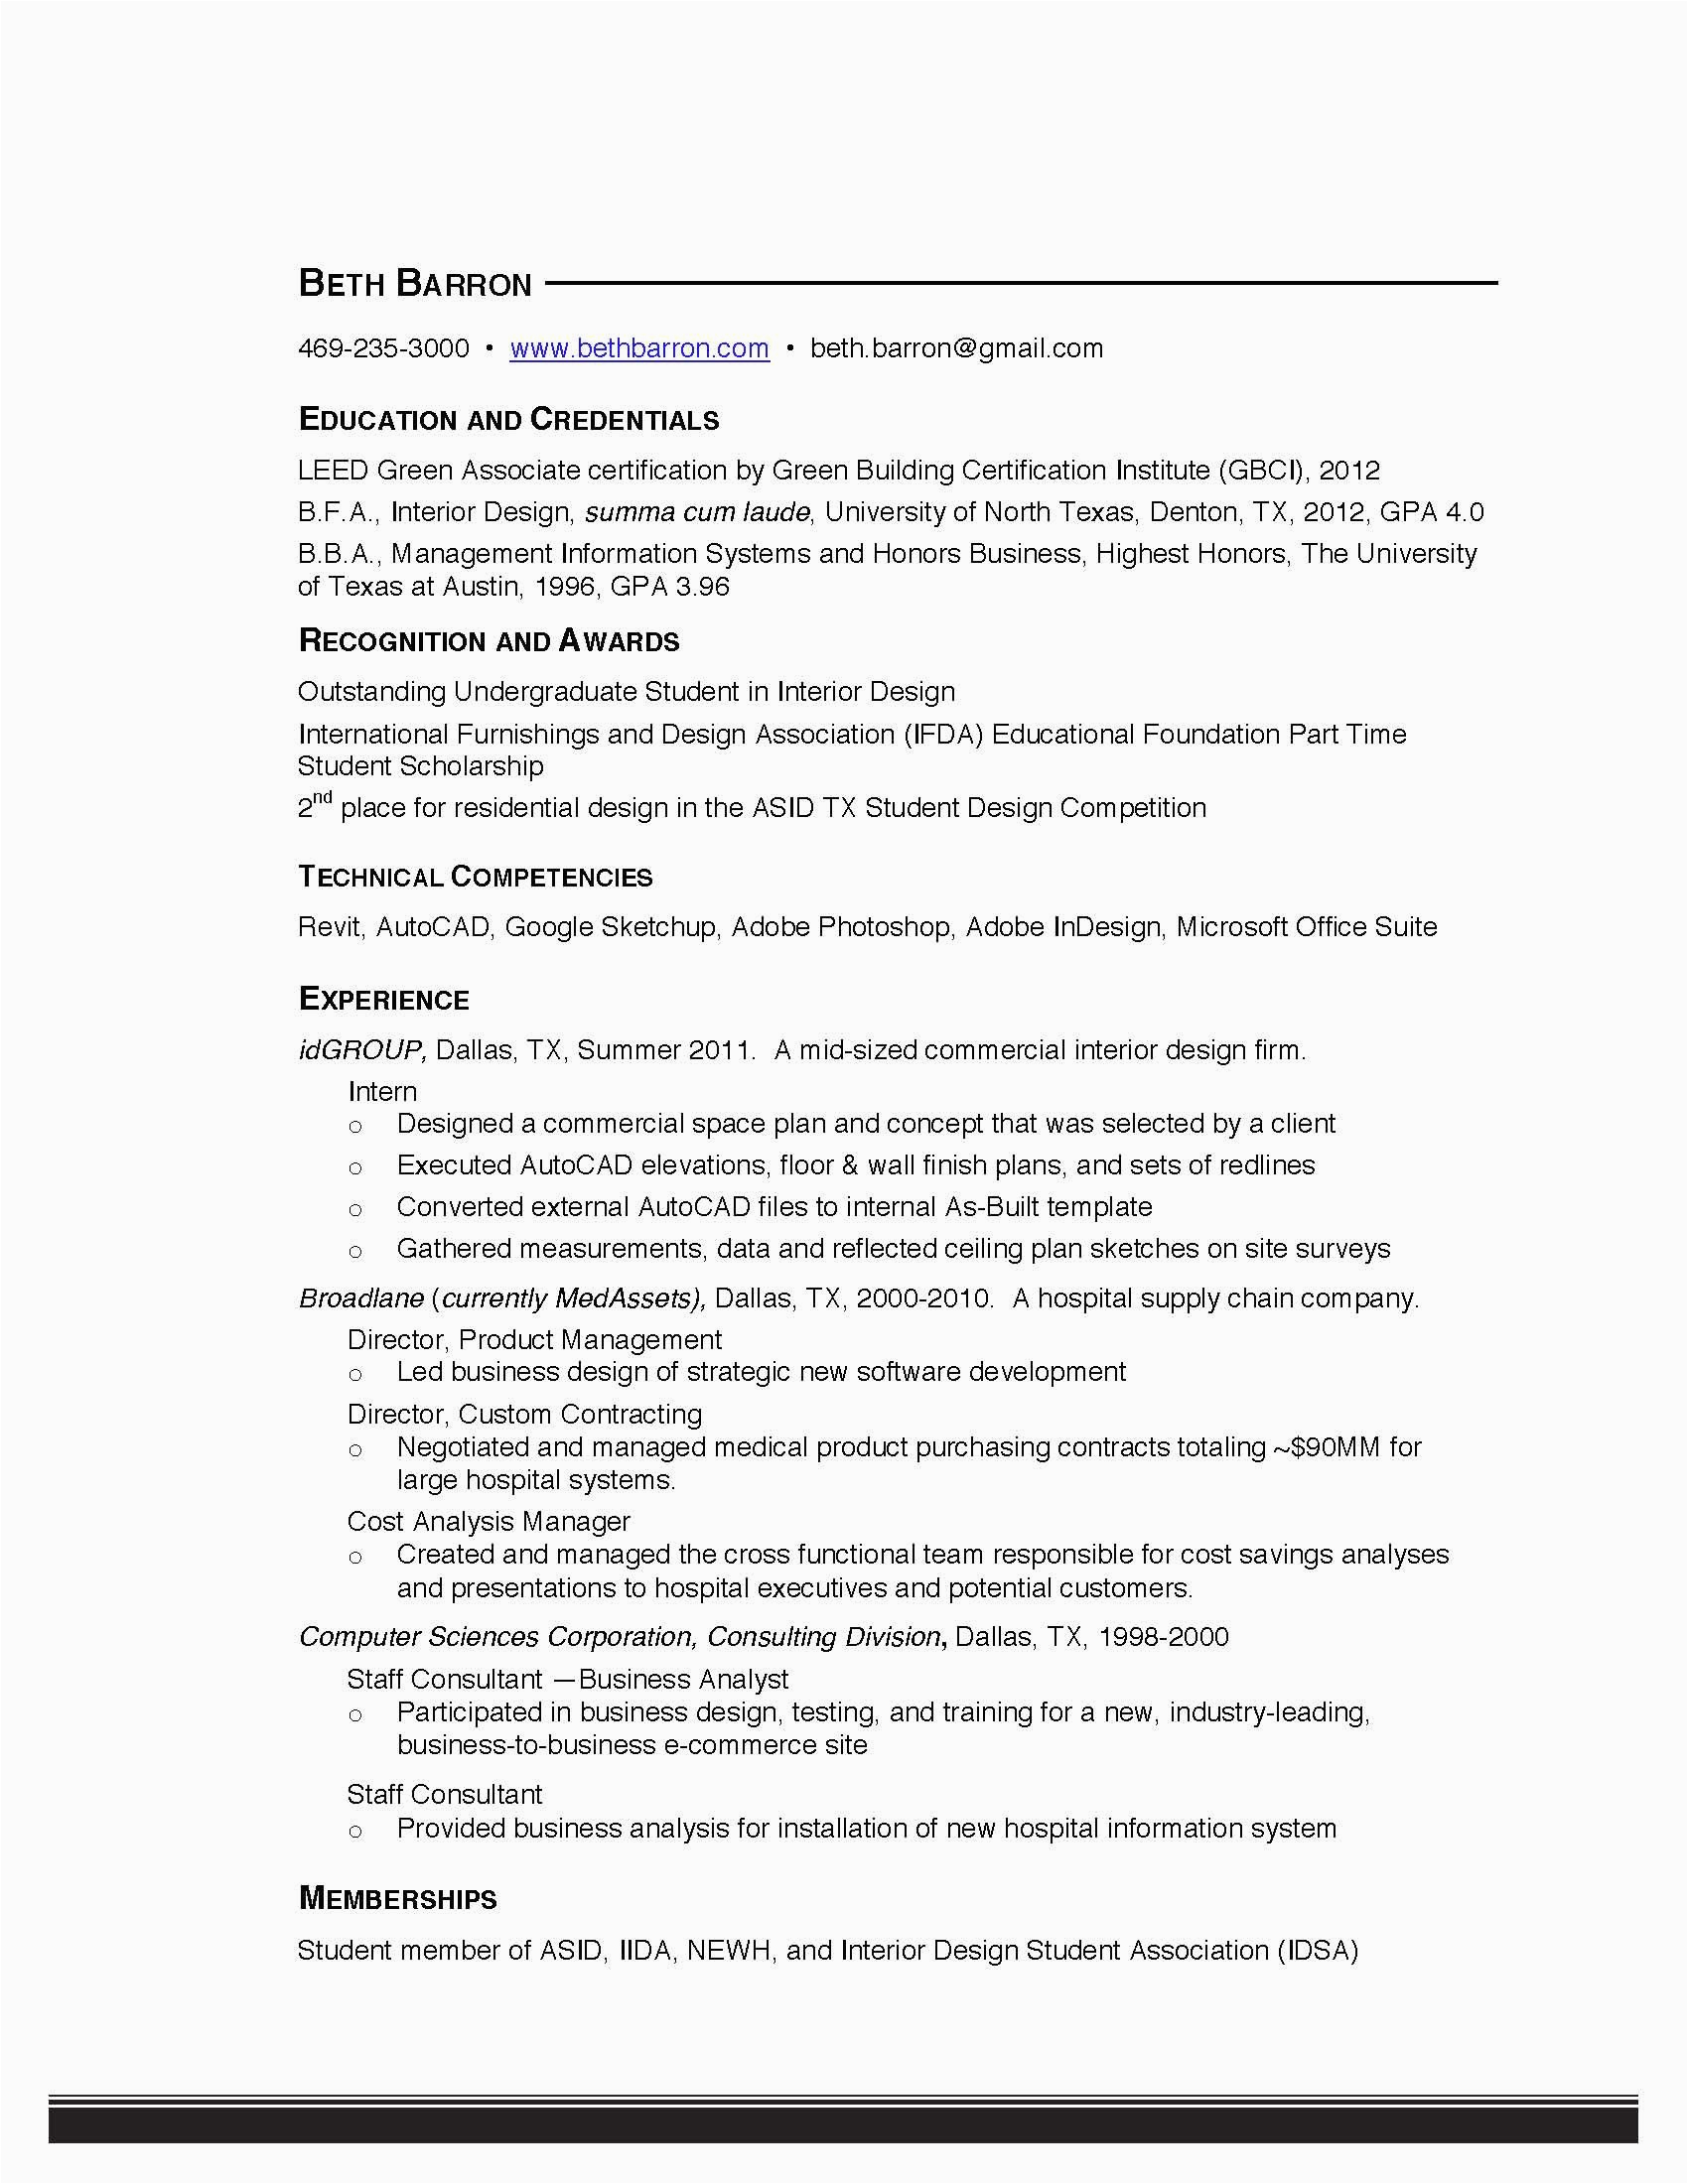 Resume References Available Upon Request Sample Resume format References Available Upon Request